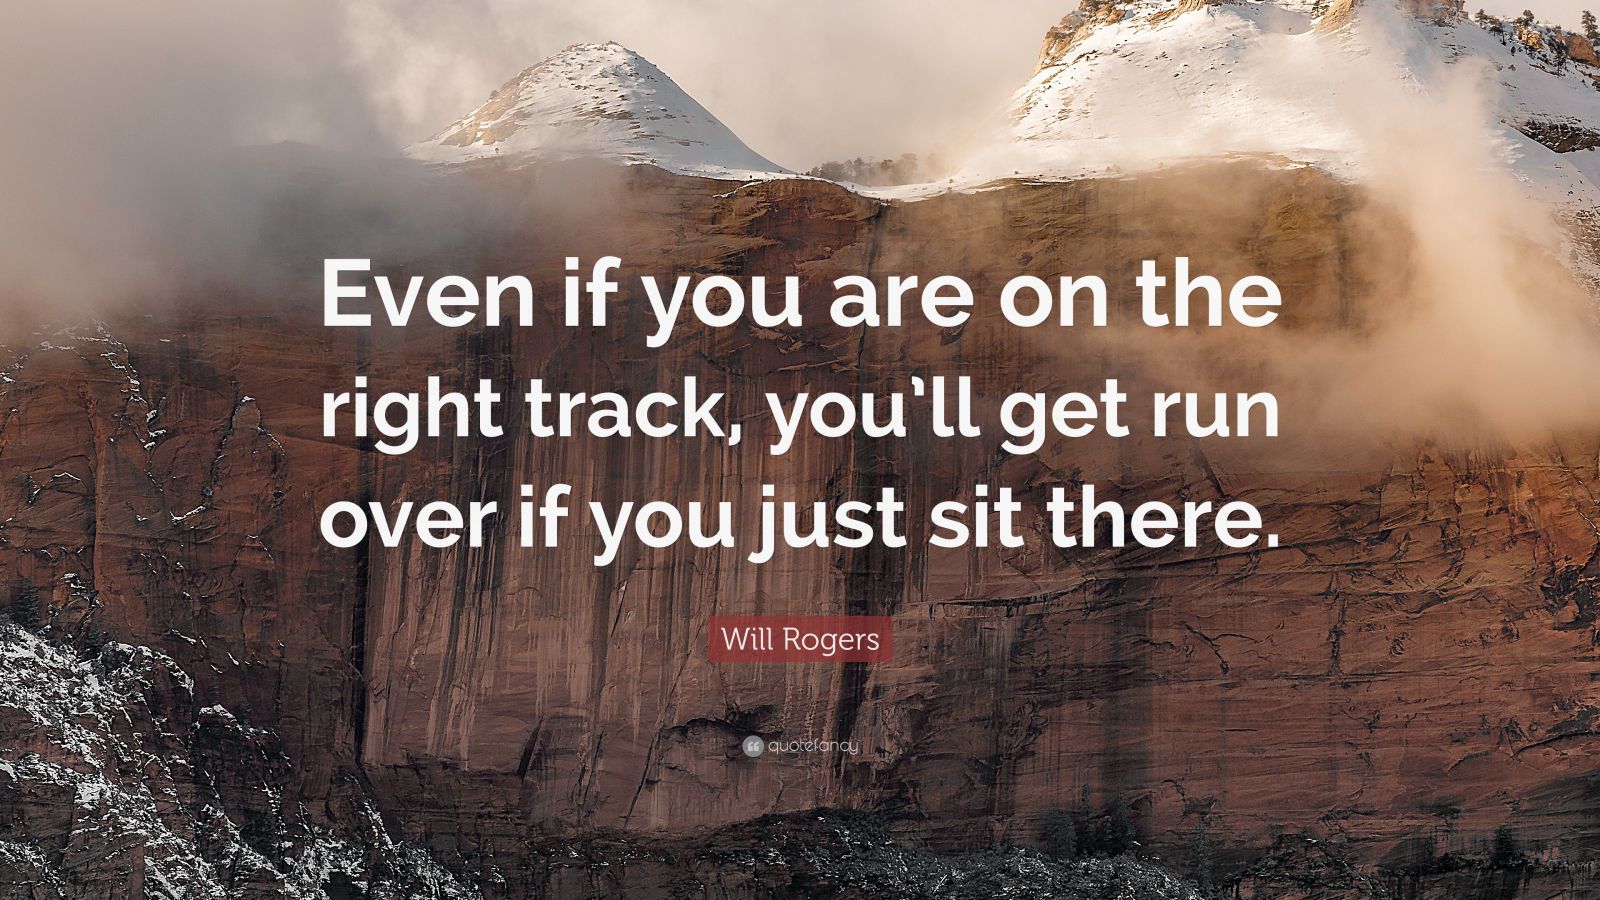 Will Rogers Quote Even If You Are On The Right Track Youll Get Run Over If You Just Sit